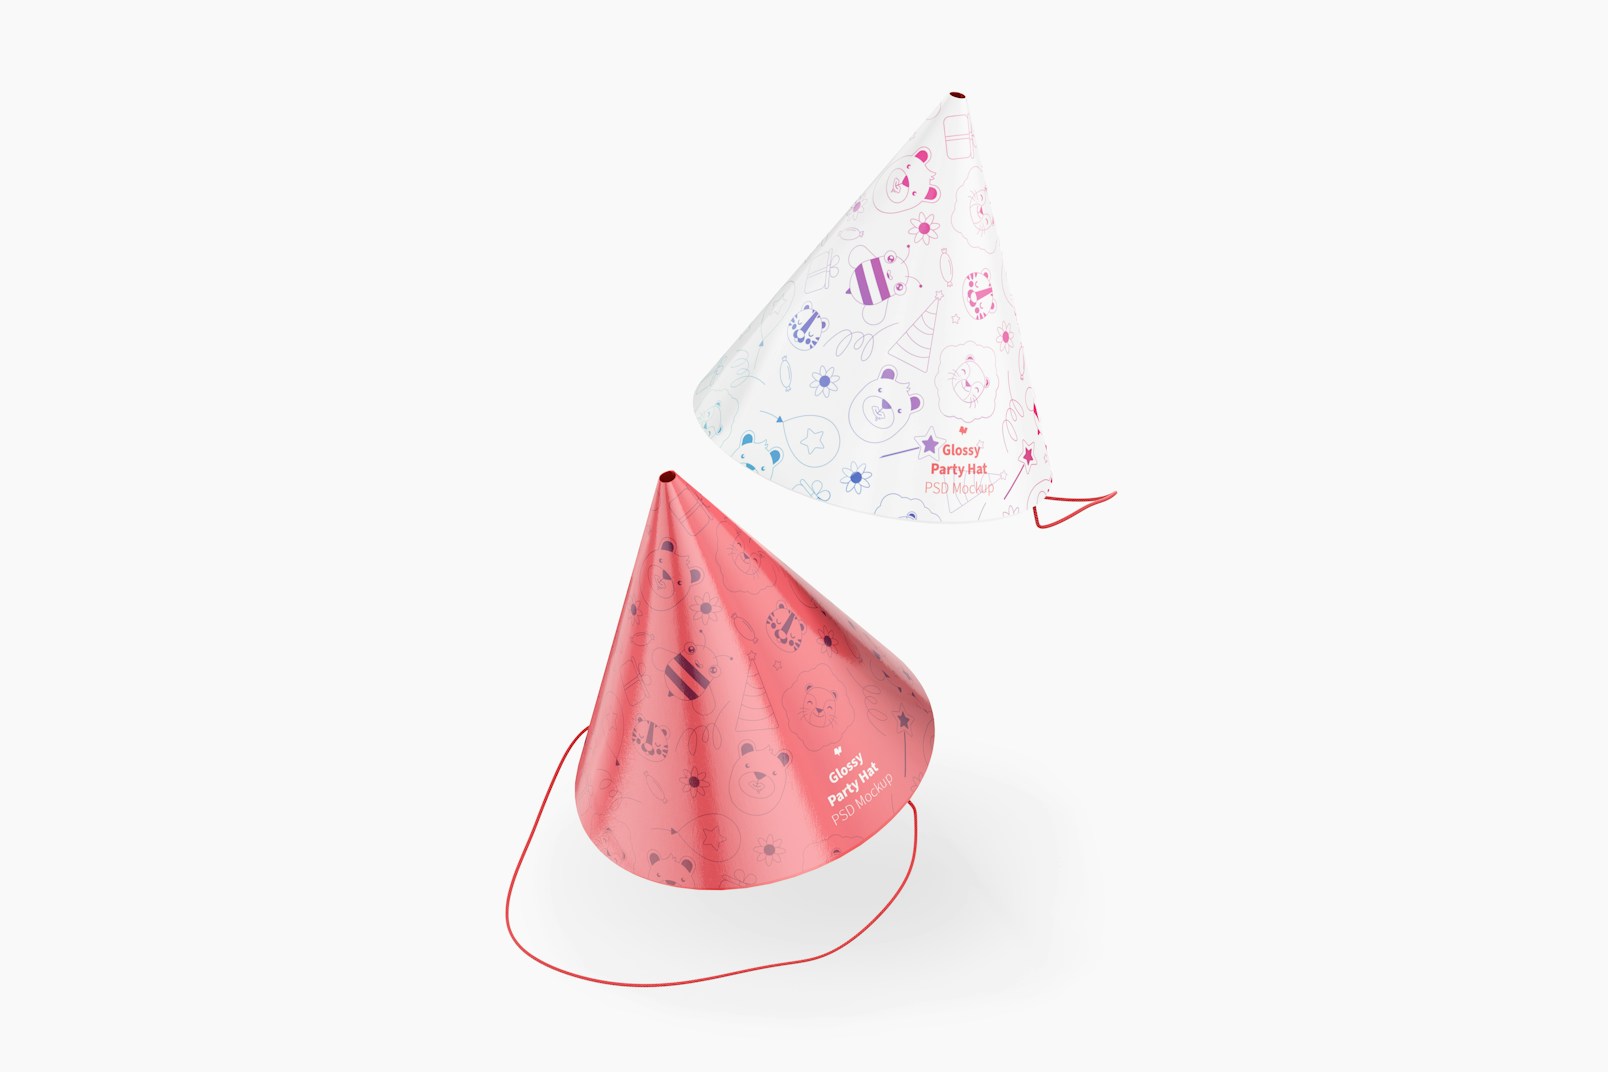 Glossy Party Hats Mockup, Floating